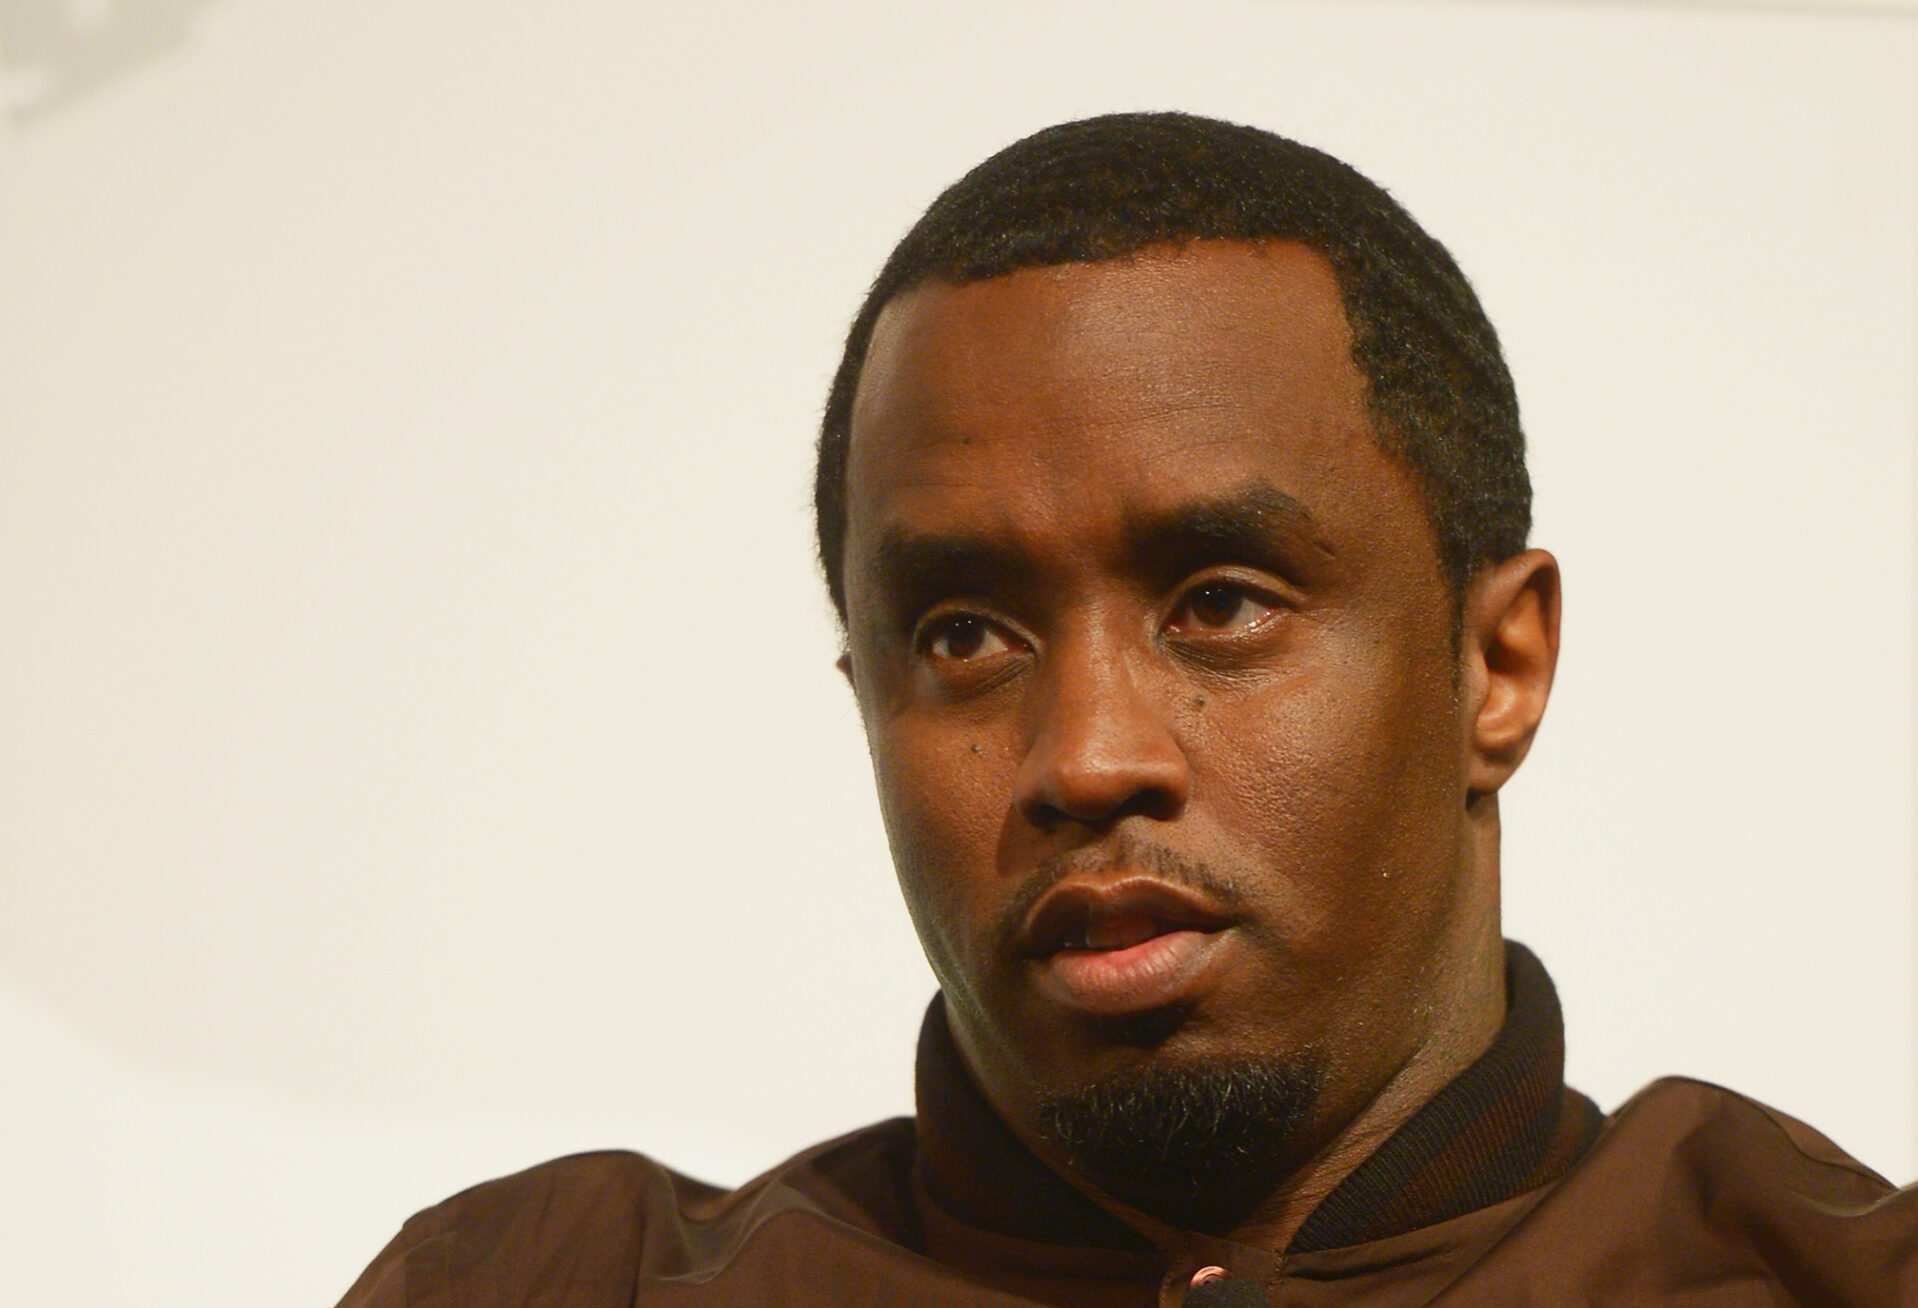 Sean 'Diddy' Combs apologizes for attack on his former girlfriend revealed in 2016 video